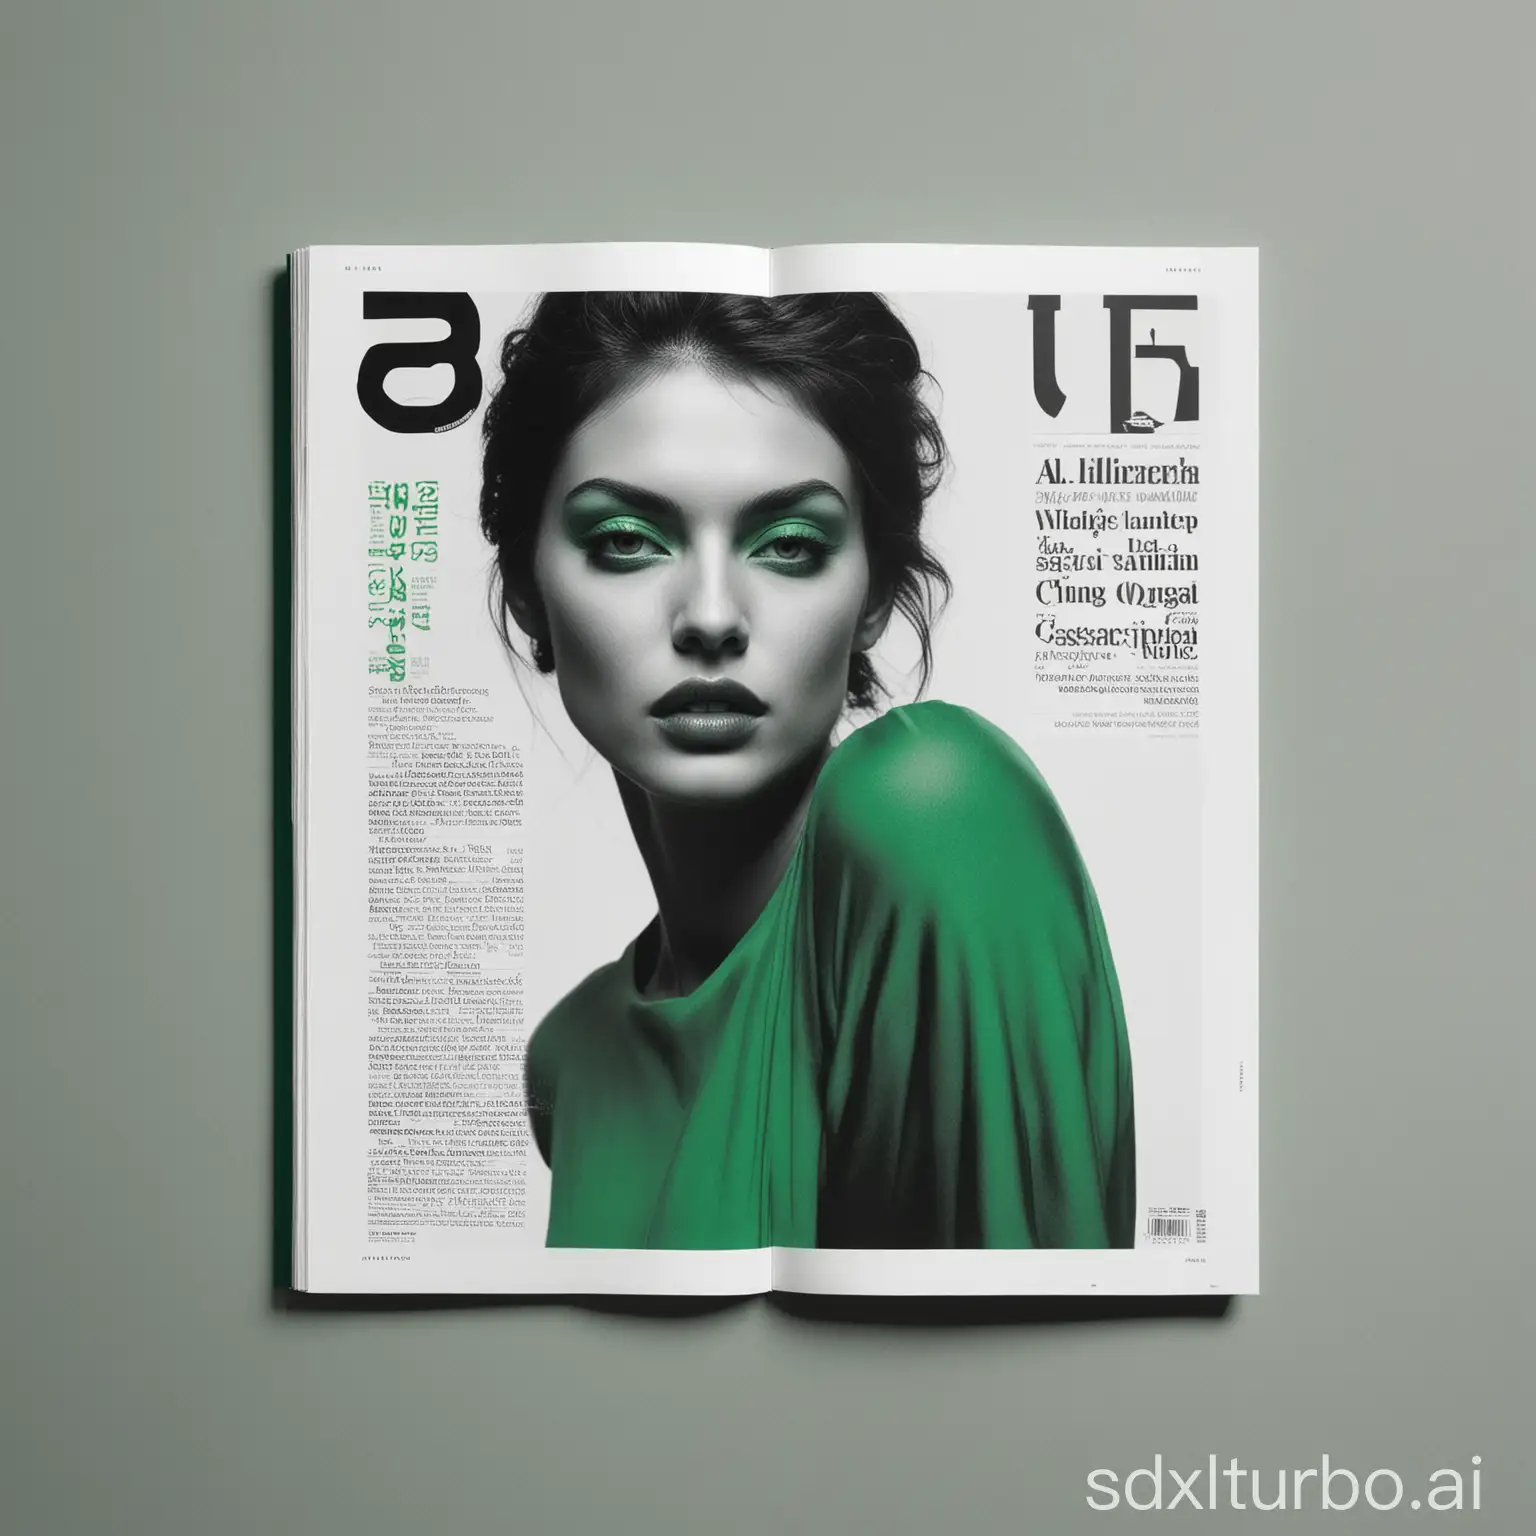 printed layout of contemporary art magazine. Ultra-modern design, bold typographics, large bright-green headers, unconventional use of high-fashion photogrpaphy --v 6